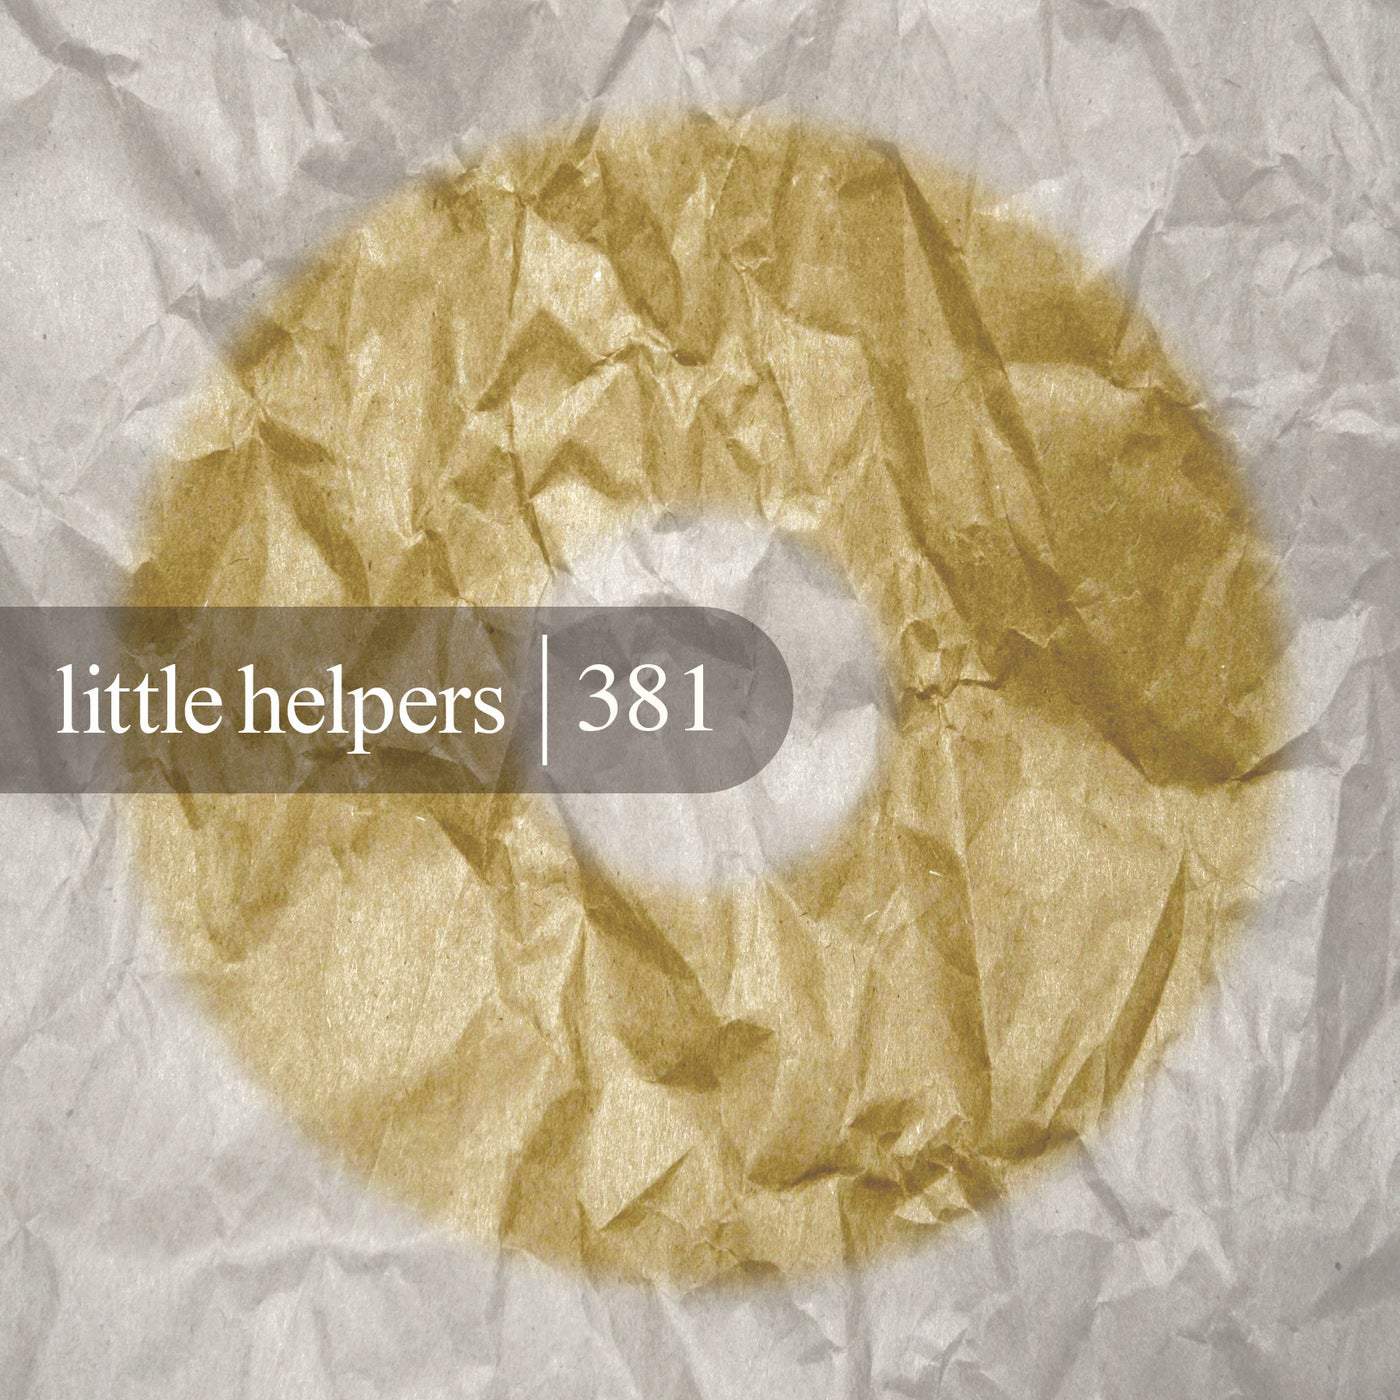 Download Chad B, Dylan Griffin - Little Helpers 381 on Electrobuzz